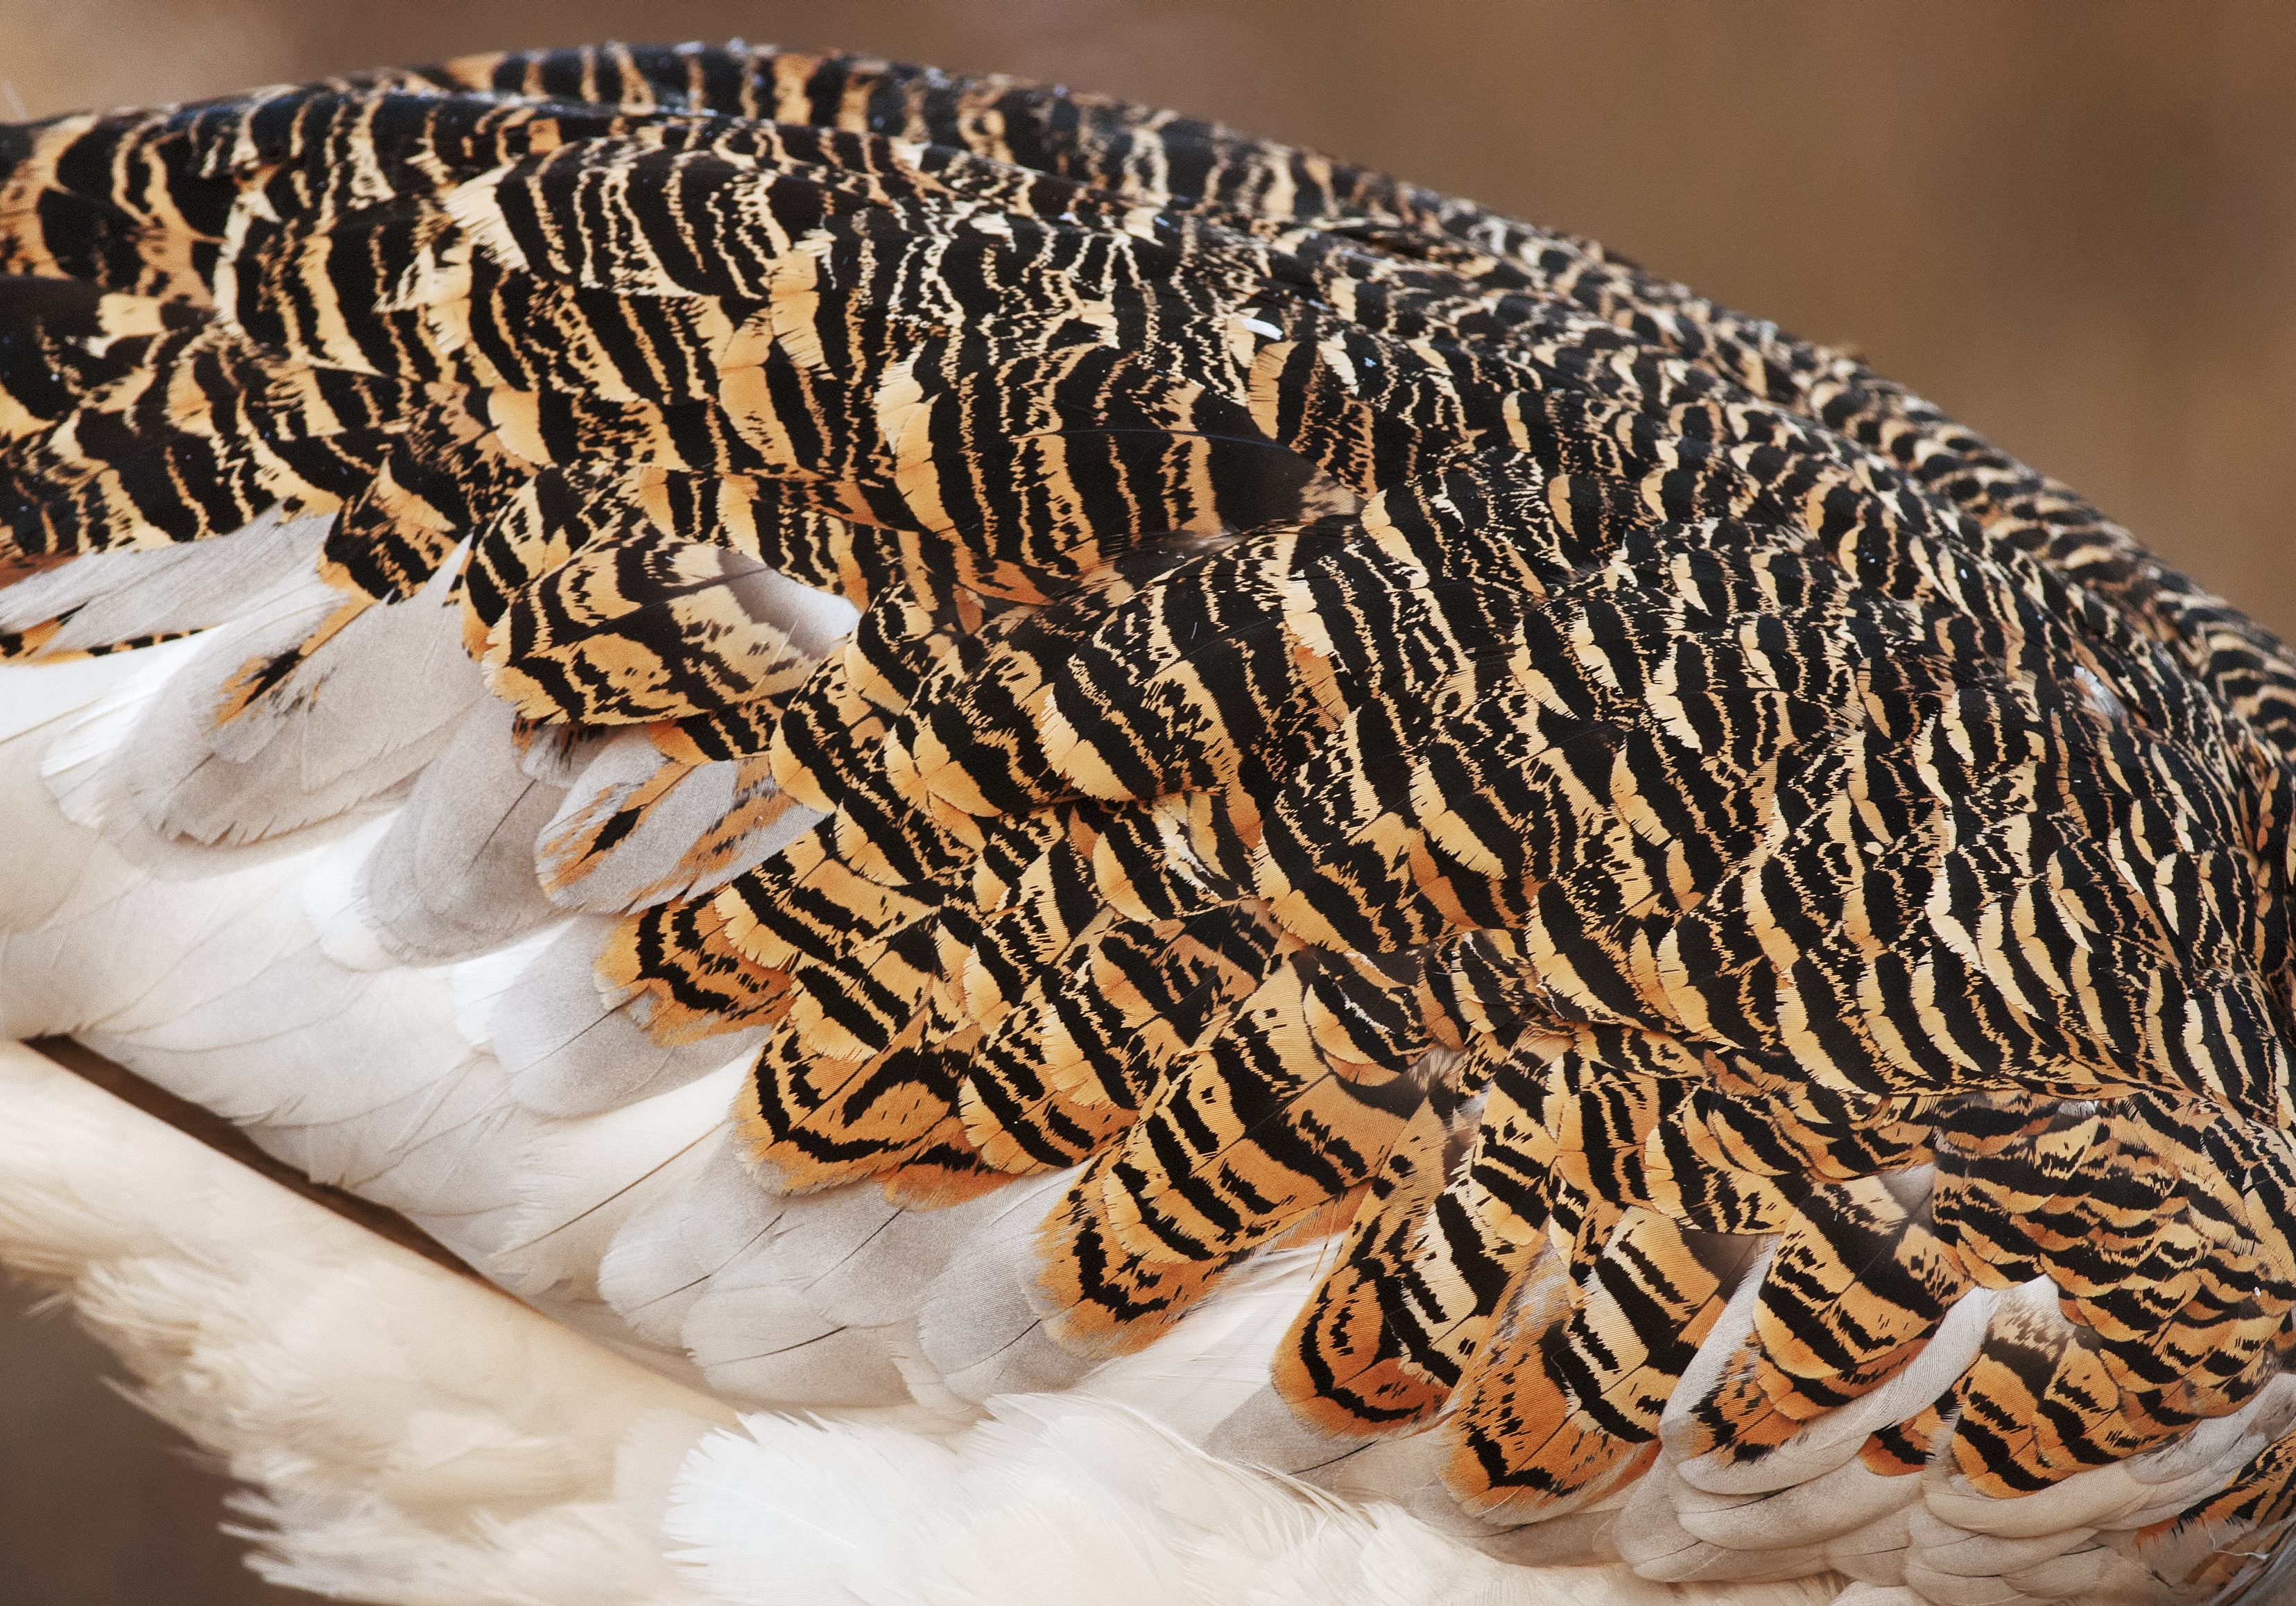 The males plummage has a tiger stripe pattern.